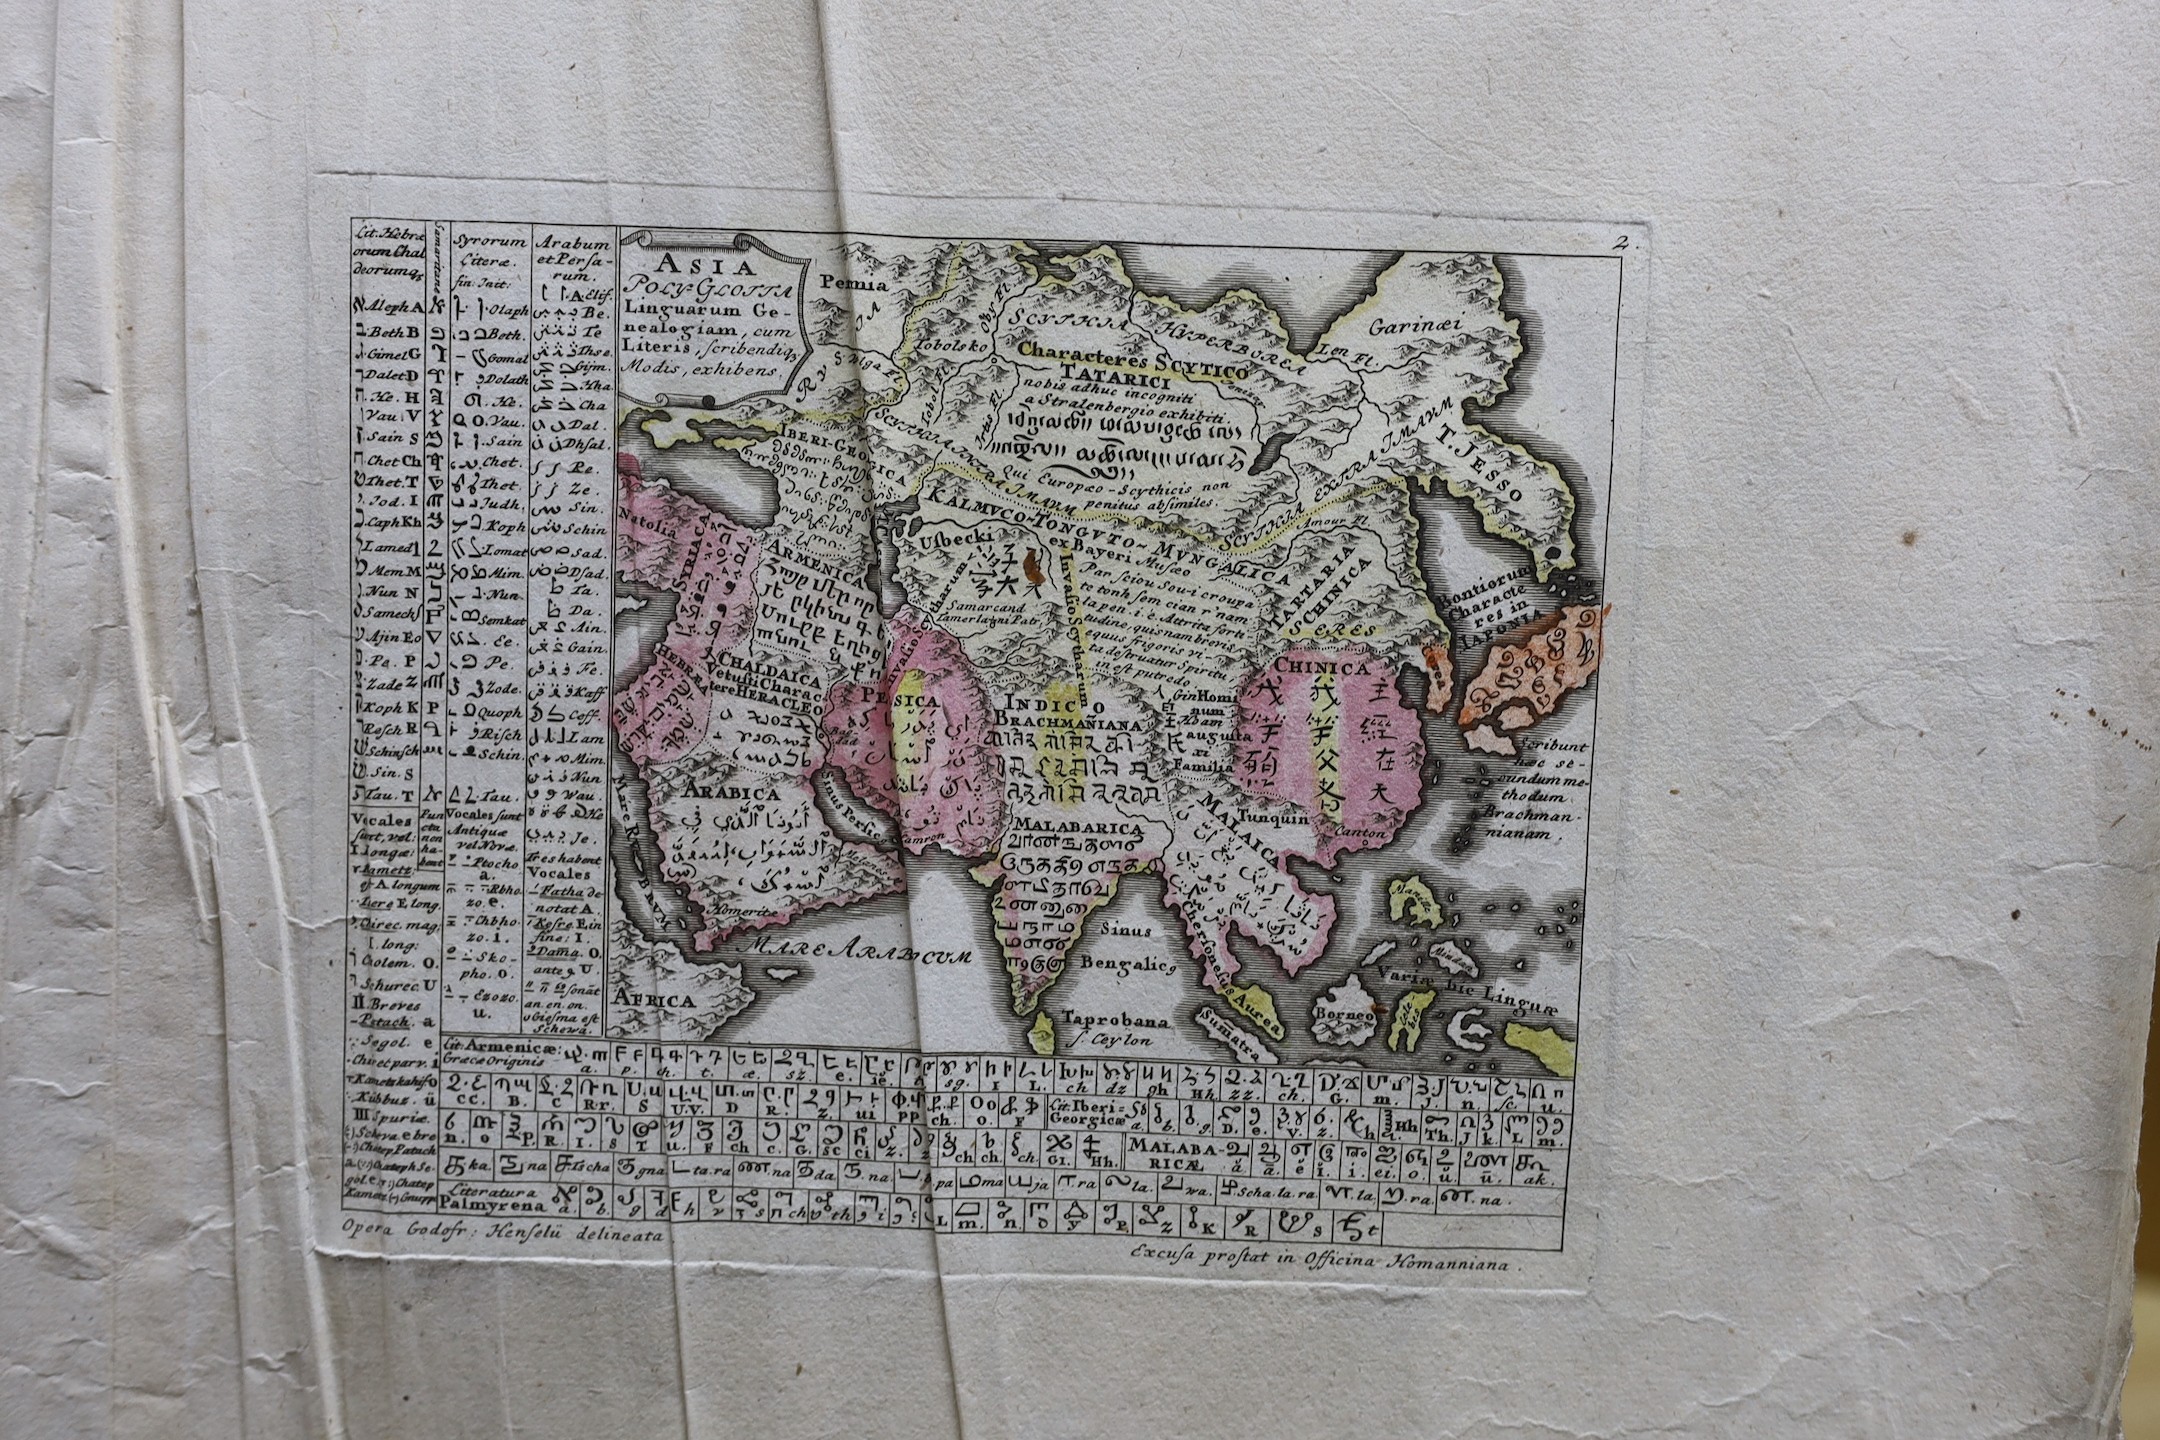 Godofredo Henselio [i.e., Gottfried Hensel], Scholae A. C. ap. Hirschb, four mappae geographico-polyglottae, in various languages and scripts, Nuremburg: Homann Heirs, 1741. and another map of Europe